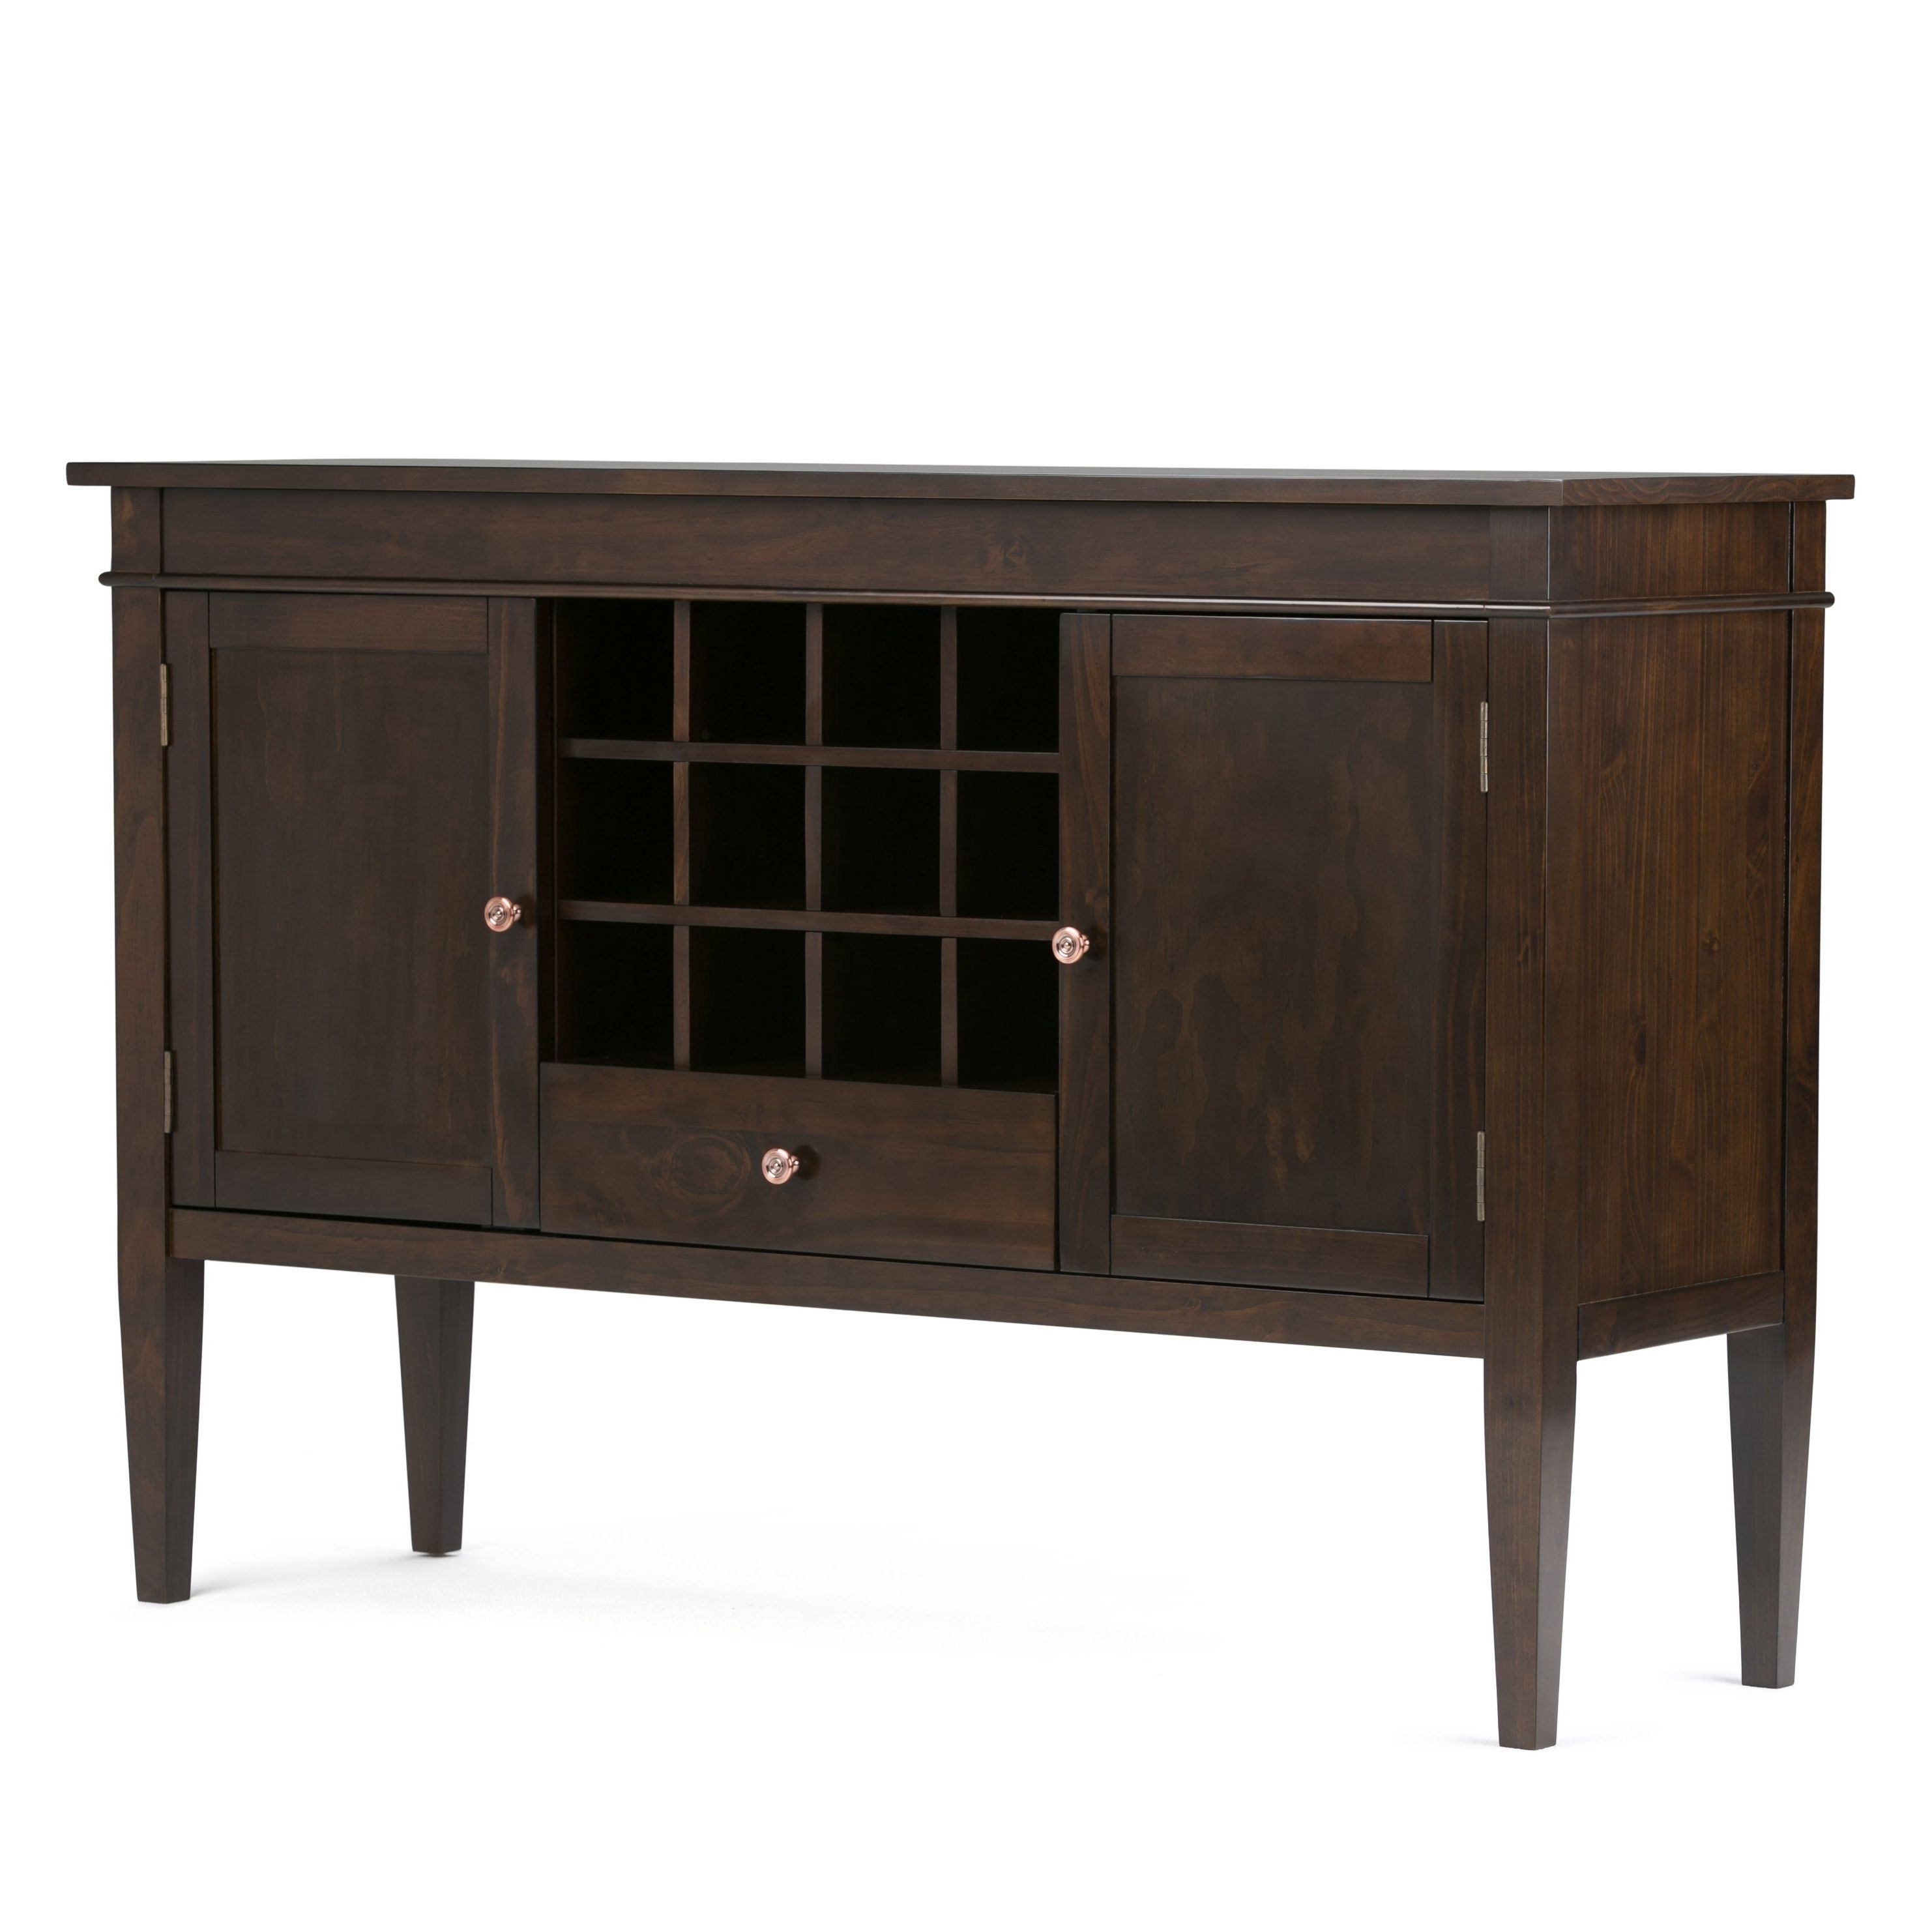 Wyndenhall Sterling Solid Wood 54 Inch Wide Contemporary Sideboard Buffet  Credenza And Wine Rack In Dark Tobacco Brown Throughout Solid Wood Contemporary Sideboards Buffets (View 7 of 20)